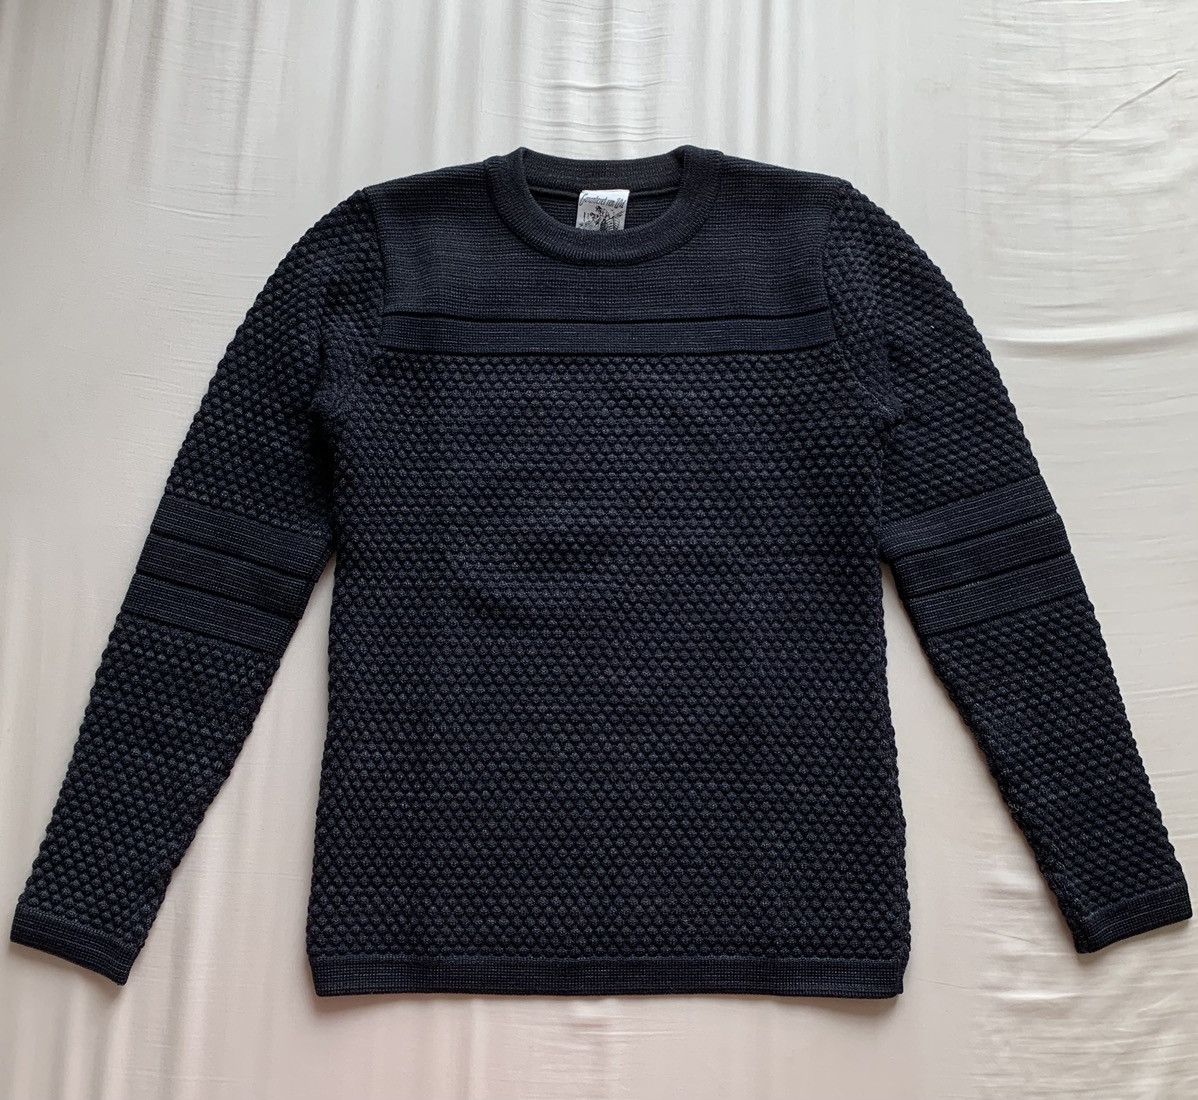 S.N.S. Herning S.N.S. HERNING Textured Virgin Wool Sweater midnight blue M Size US M / EU 48-50 / 2 - 2 Preview